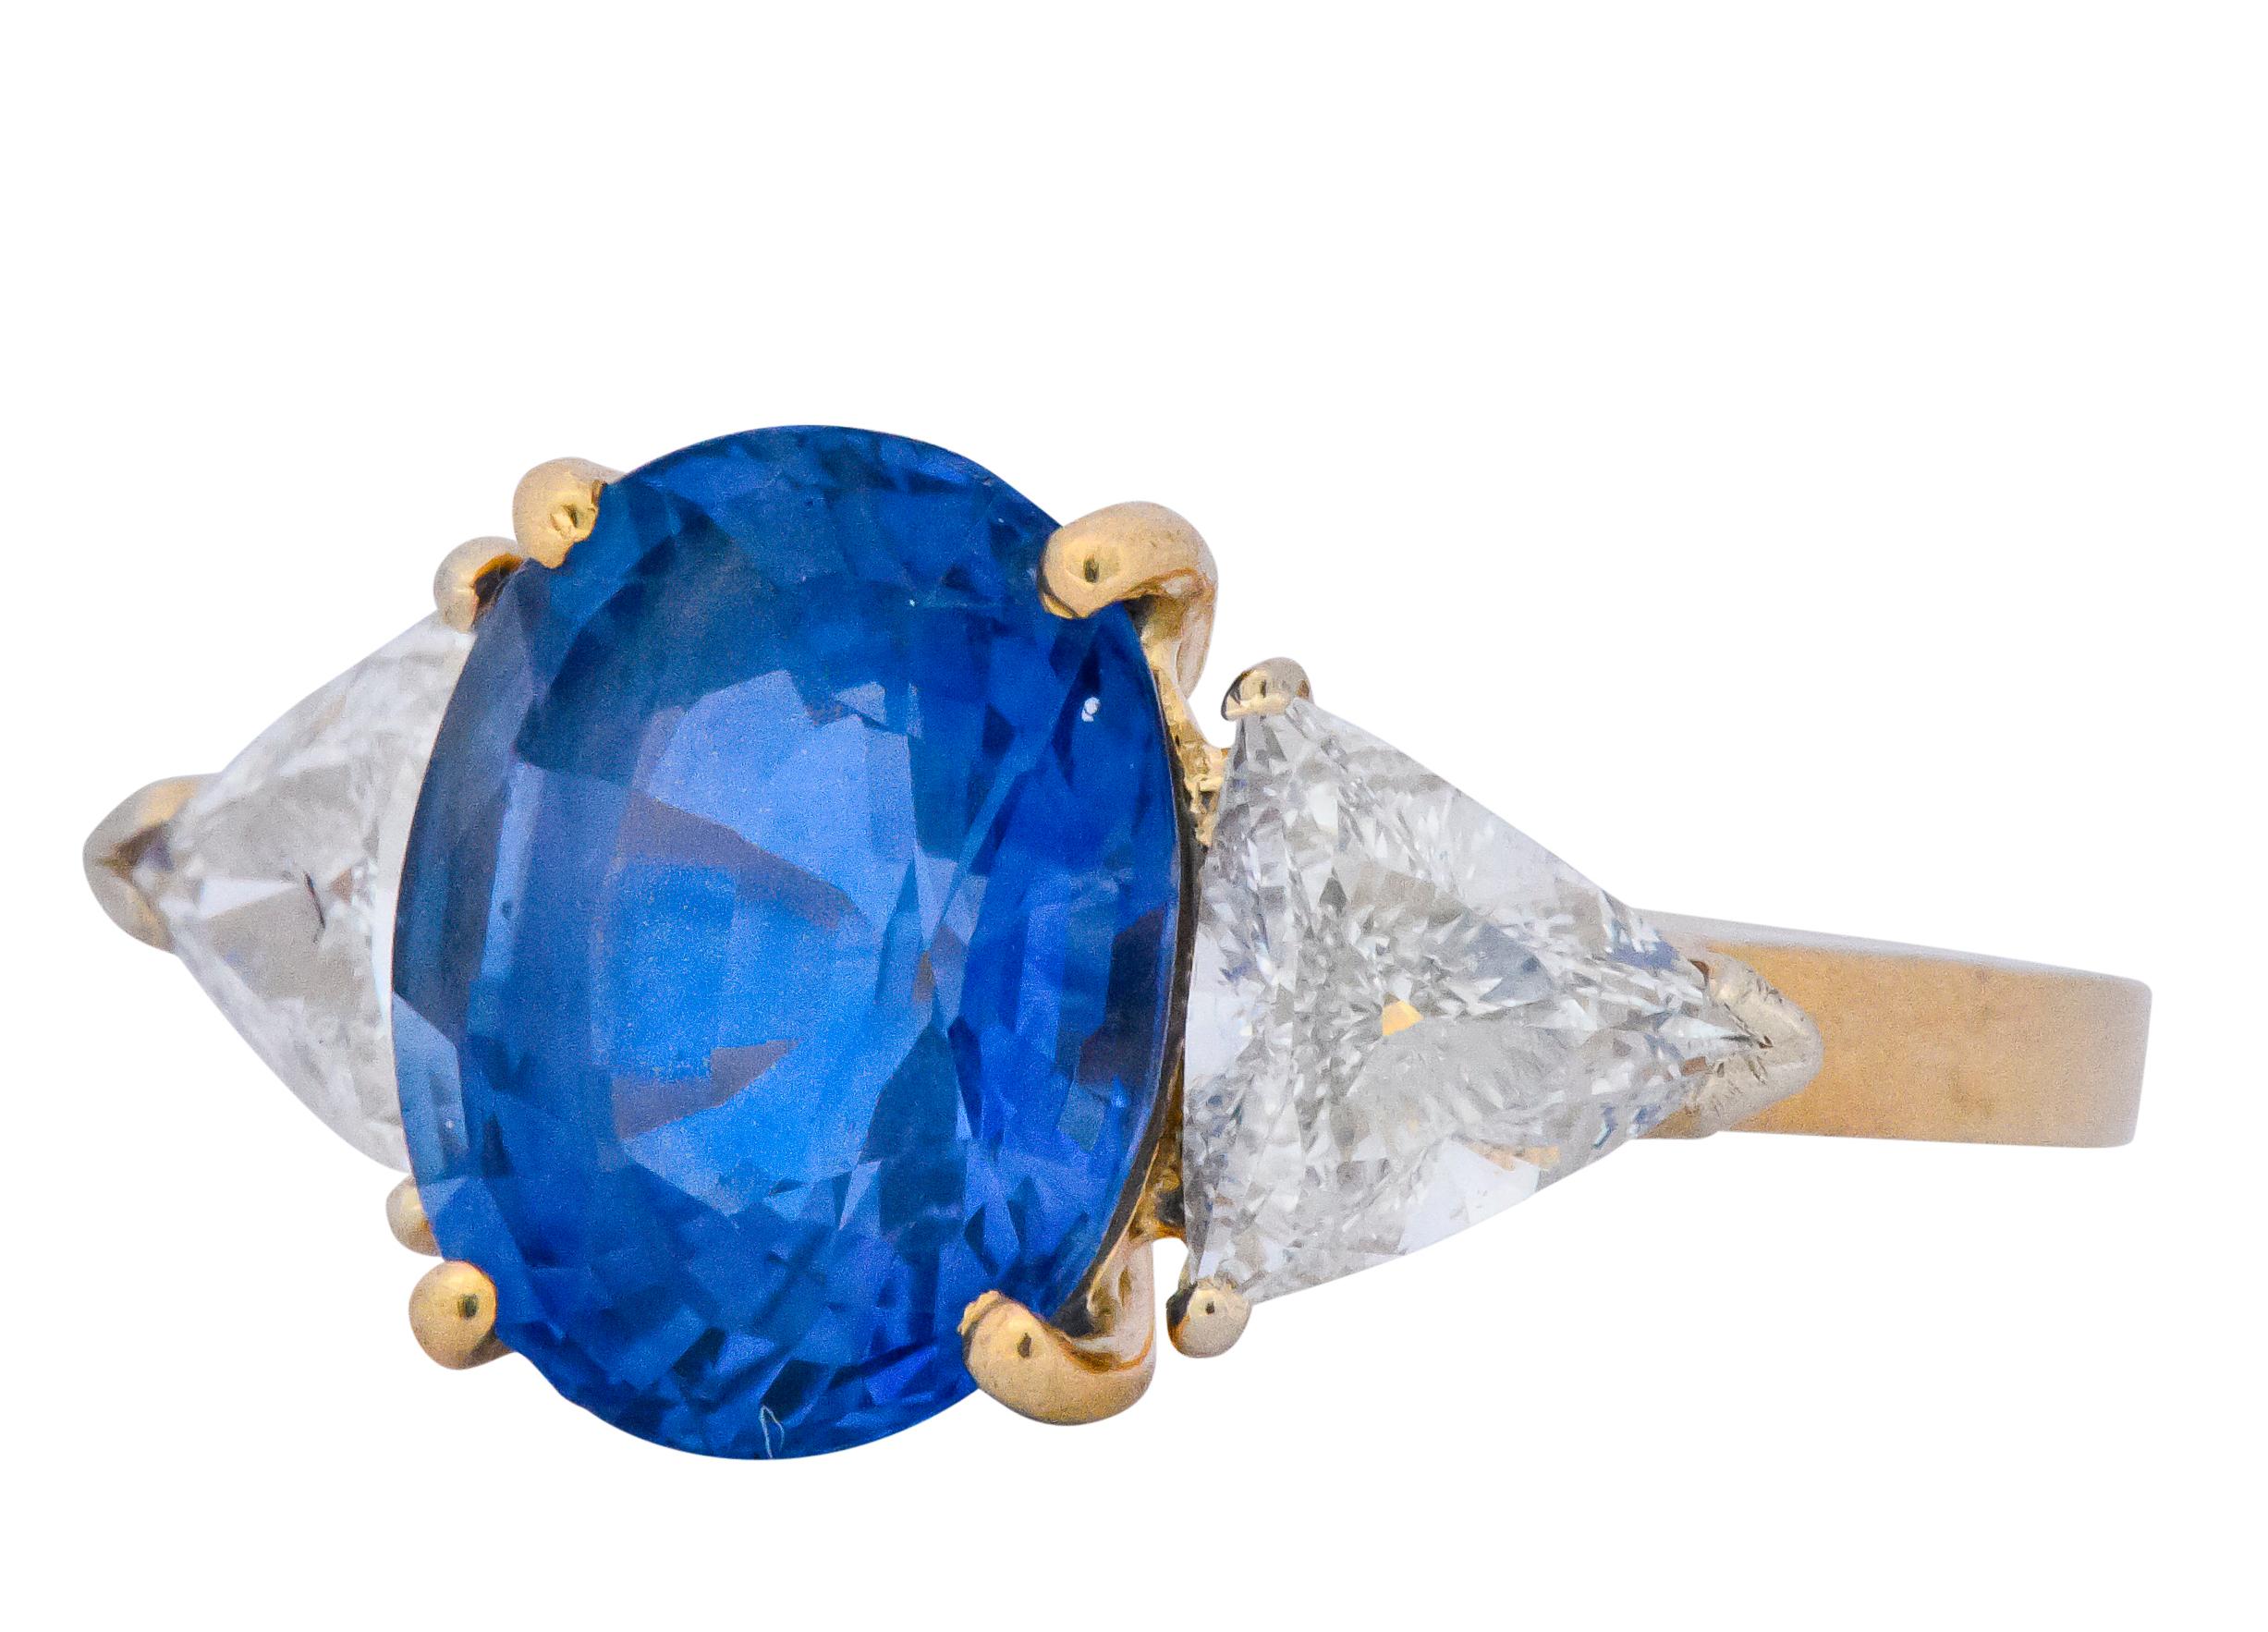 Centering an oval cut Ceylon sapphire (Sri Lanka), weighing approximately 5.50 carats

Flanked by trillion cut diamonds weighing approximately 1.30 carats total, G color and VS2 to SI1 clarity

6.80 CTW

Prong set in cathedral style mount

Stamped